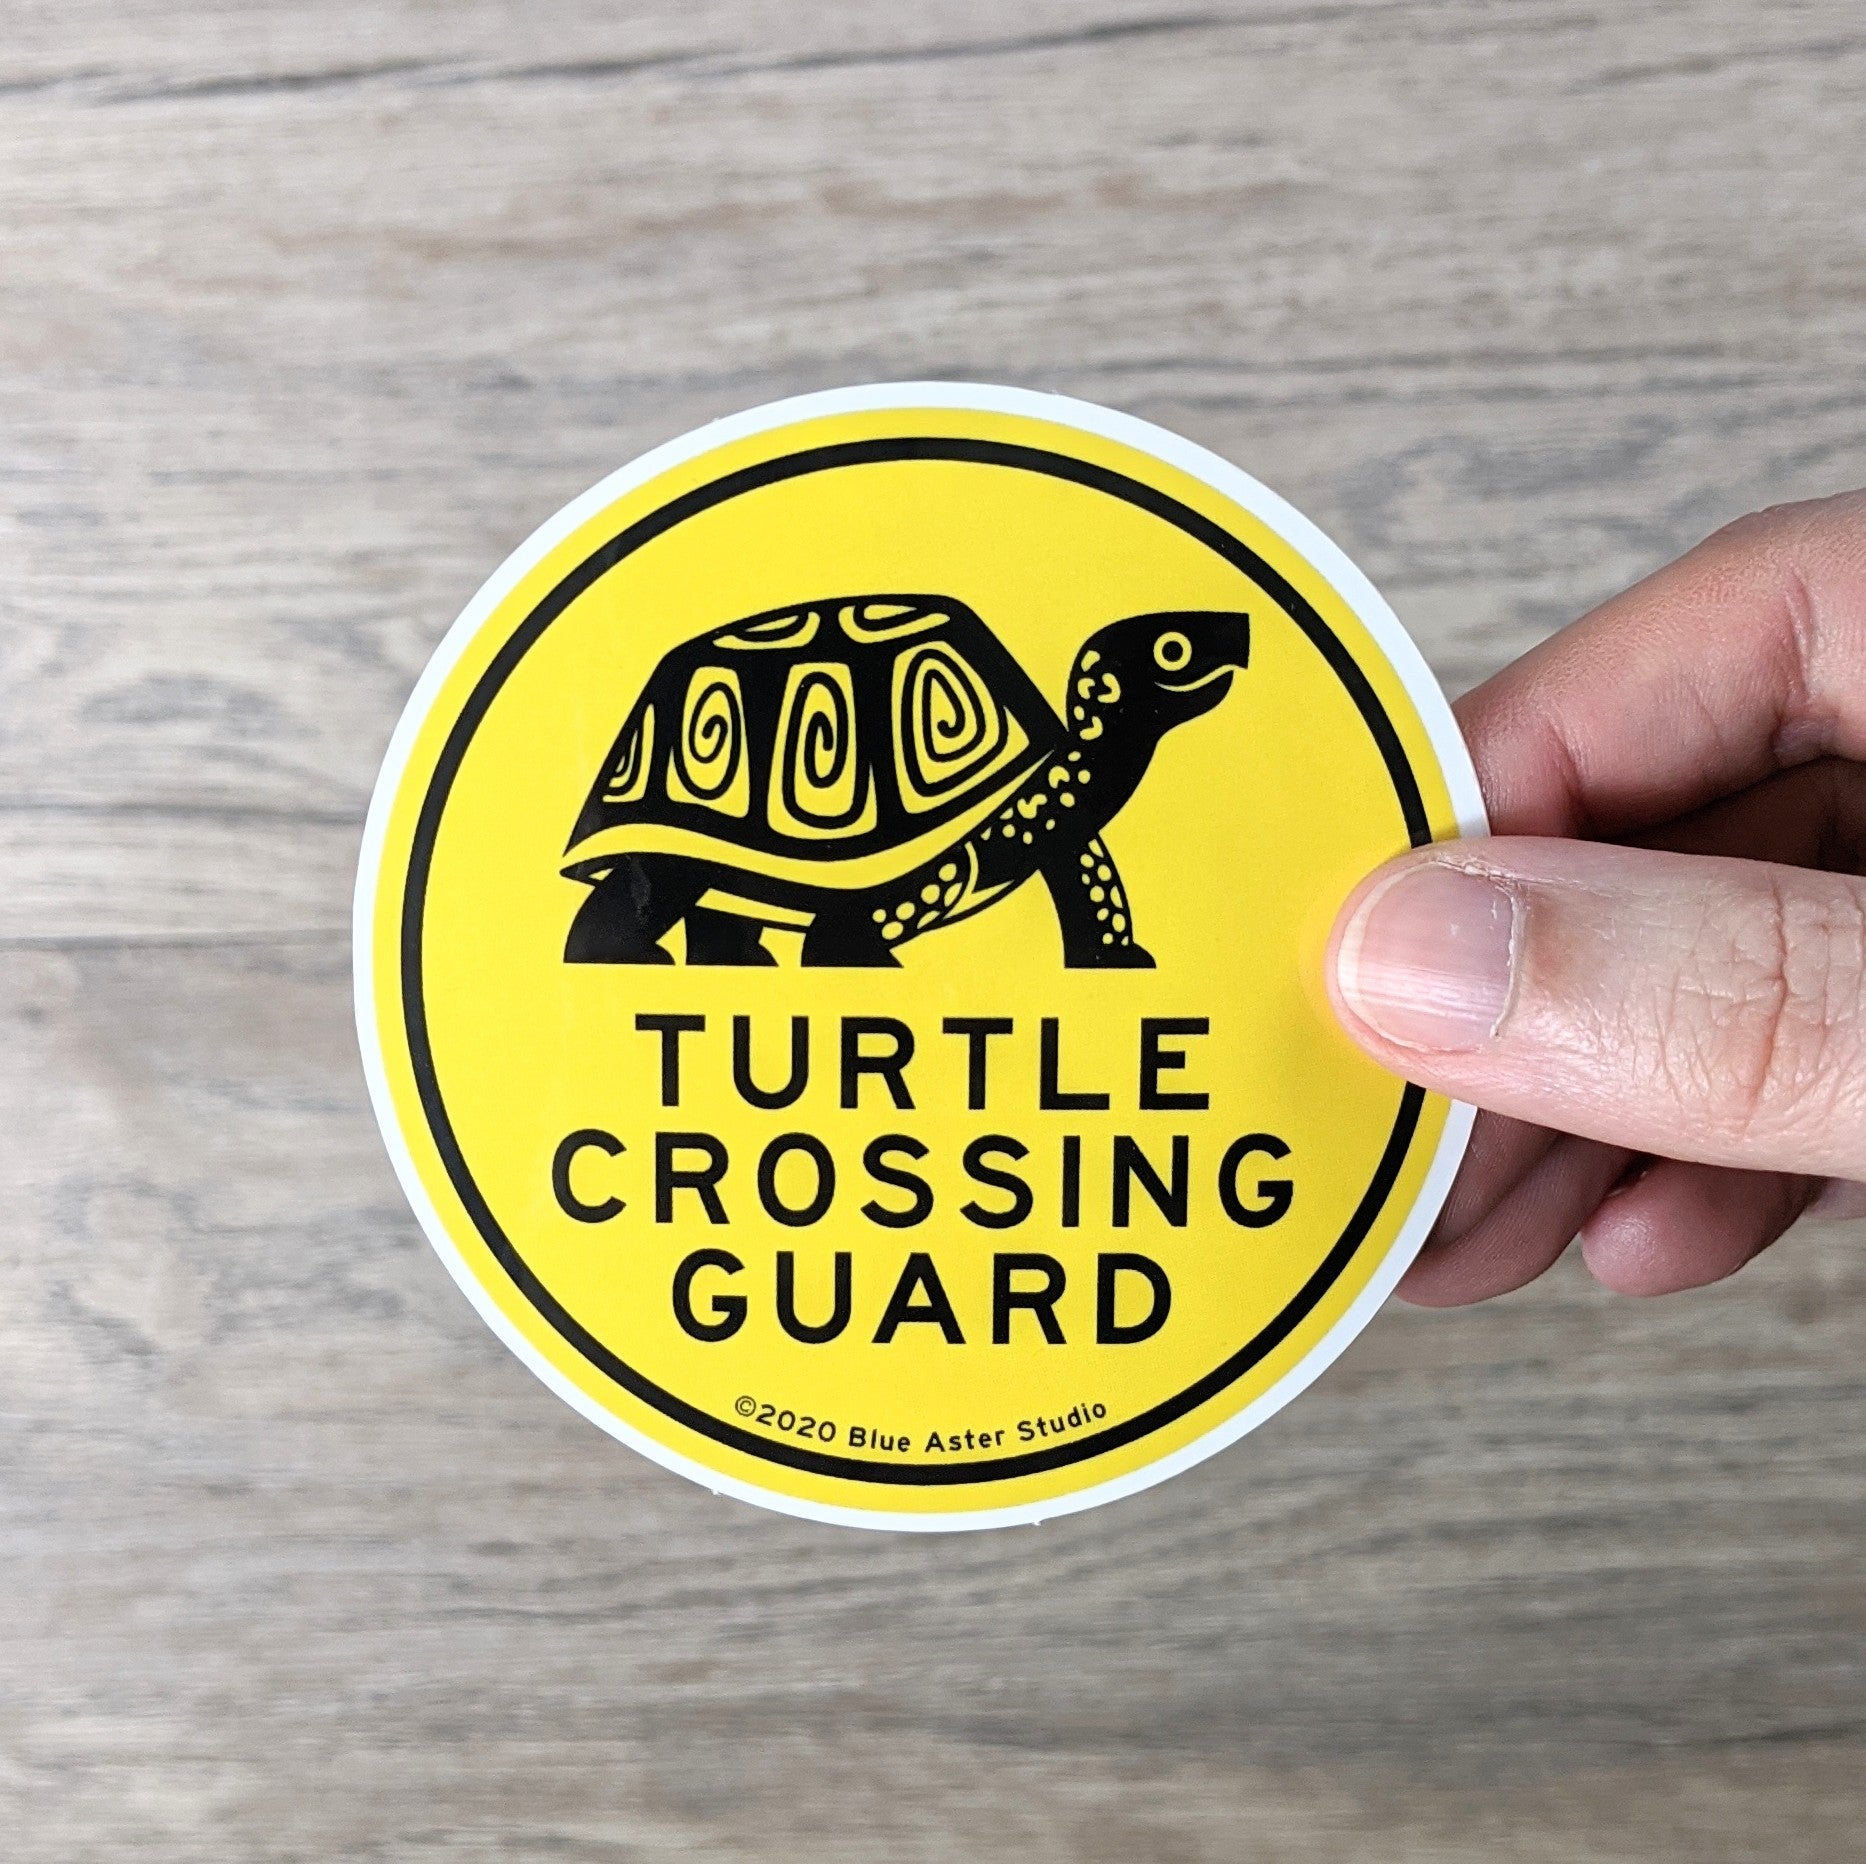 Hand holding a 3 inch round, yellow vinyl sticker with an illustration of a box turtle and the words "Turtle Crossing Guard" in black.